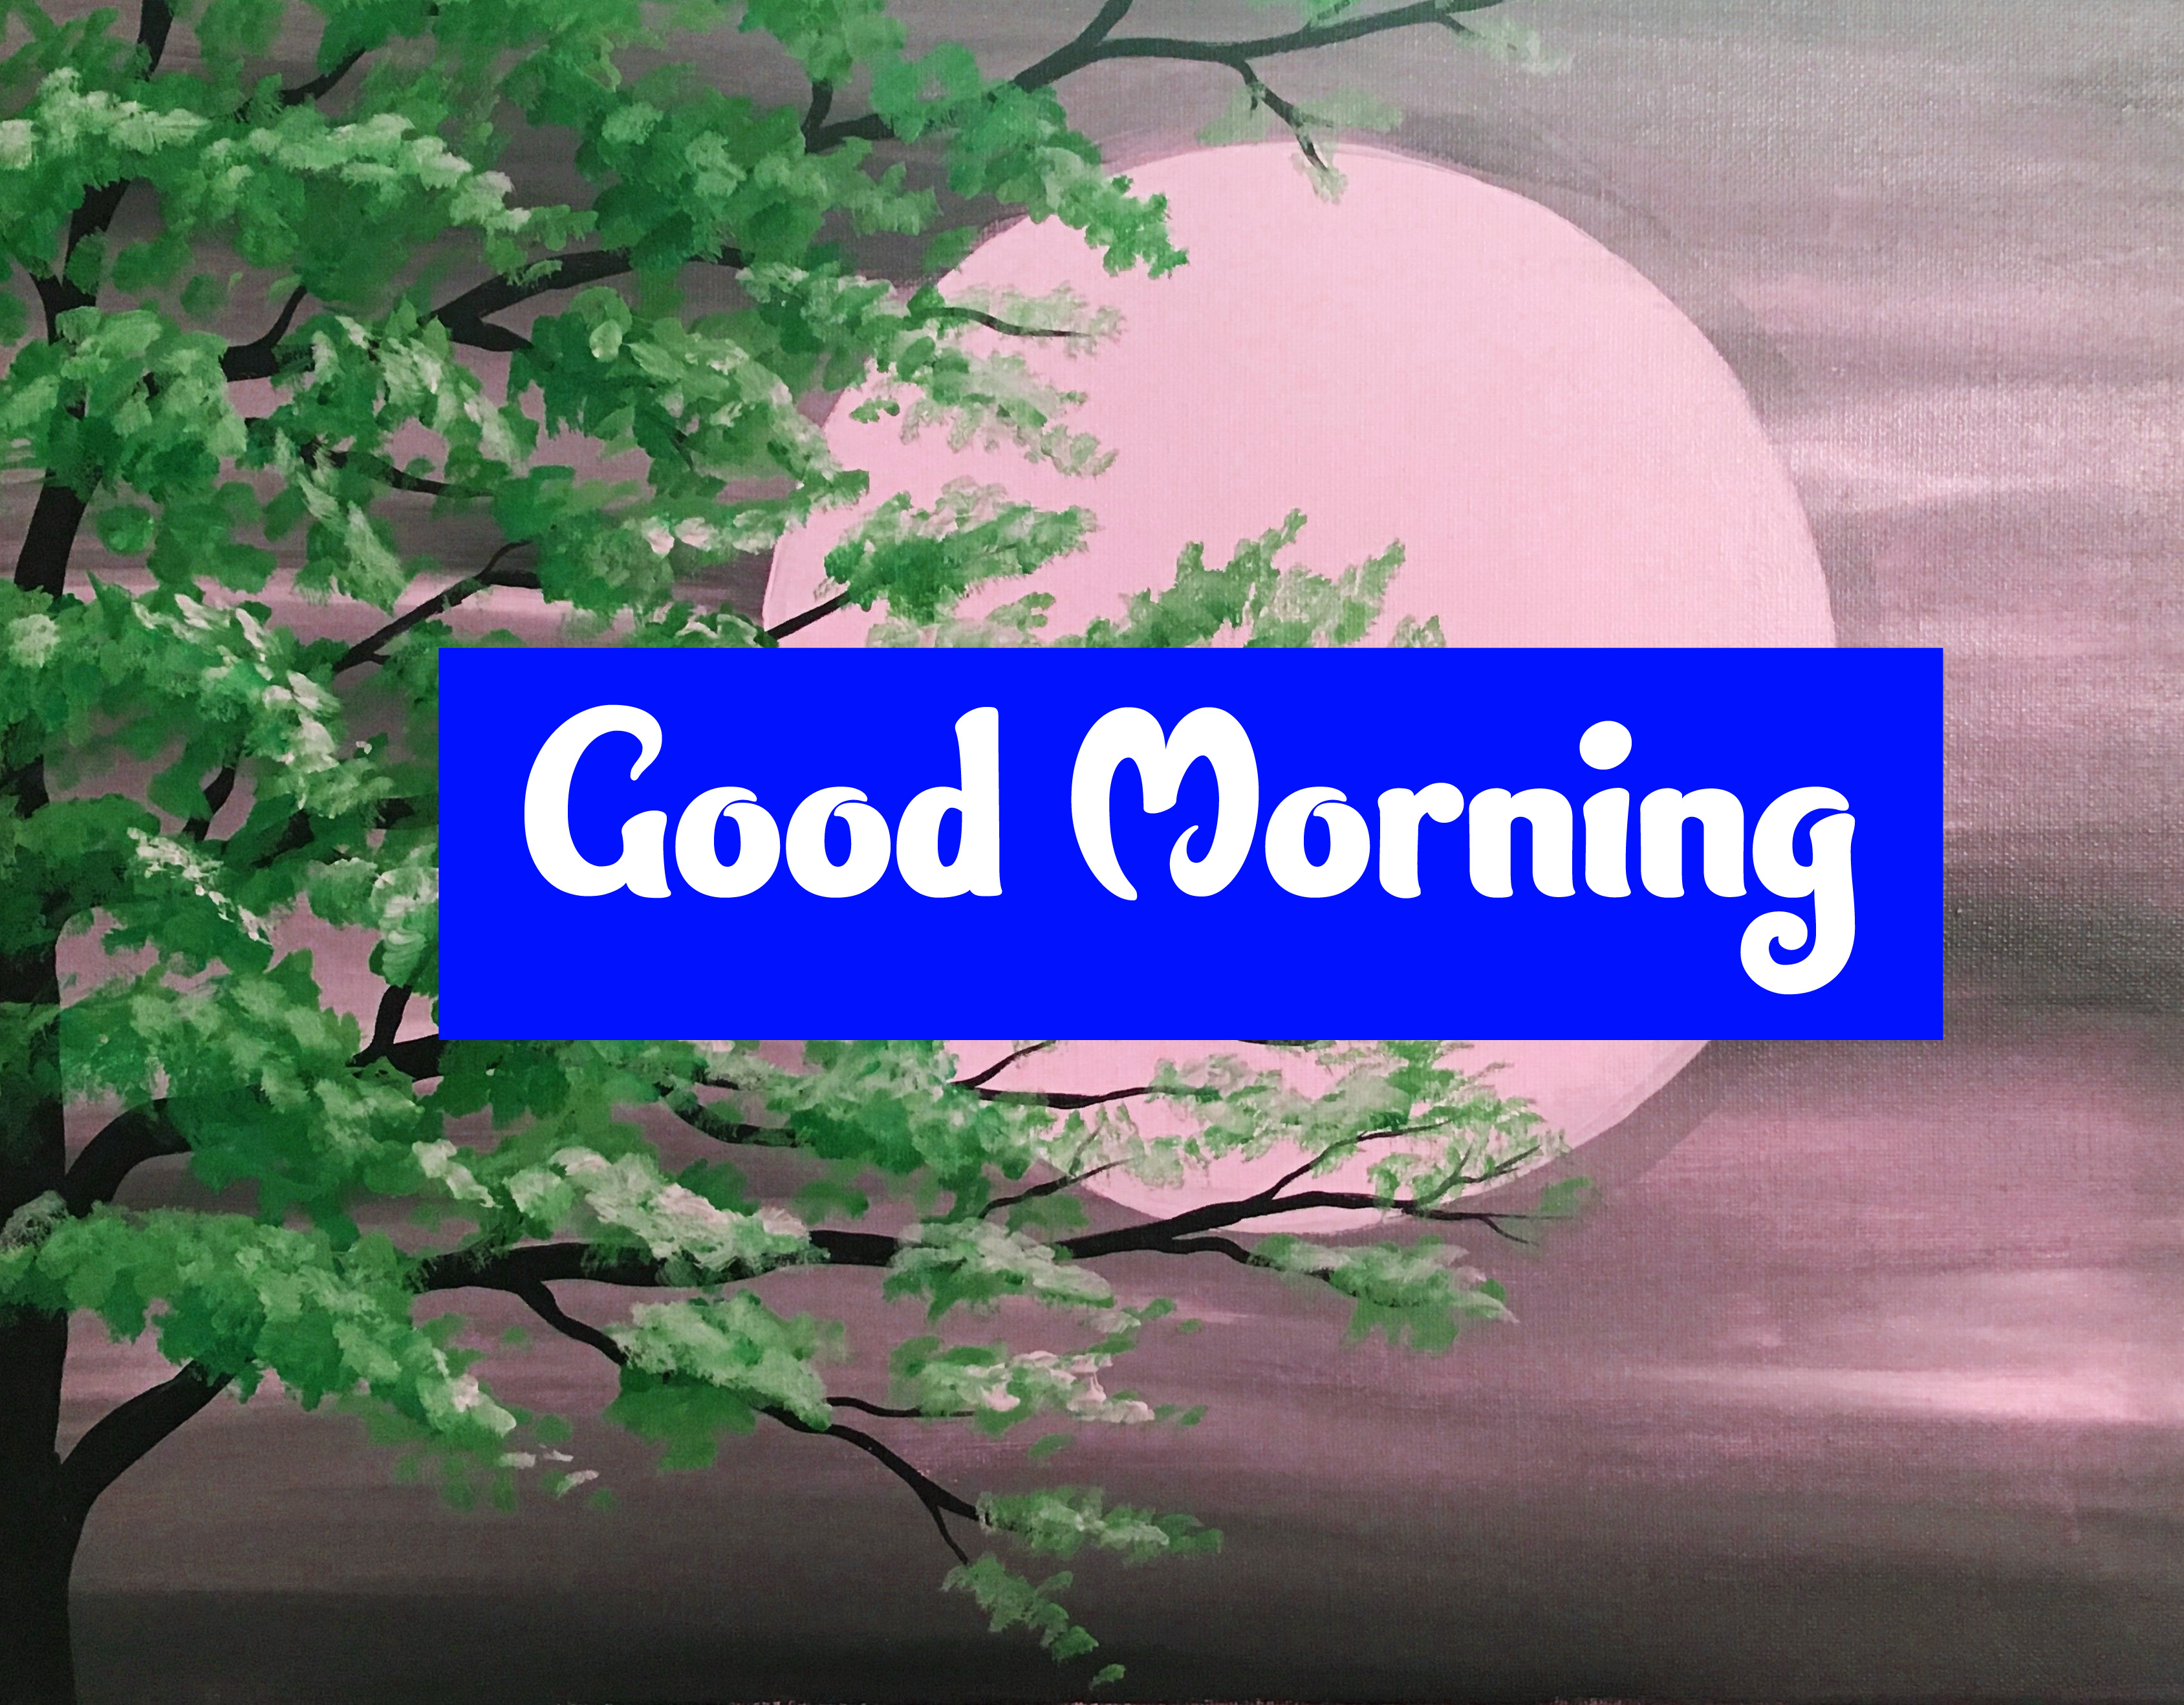 Good Morning Images Stickers For Whatsapp 3